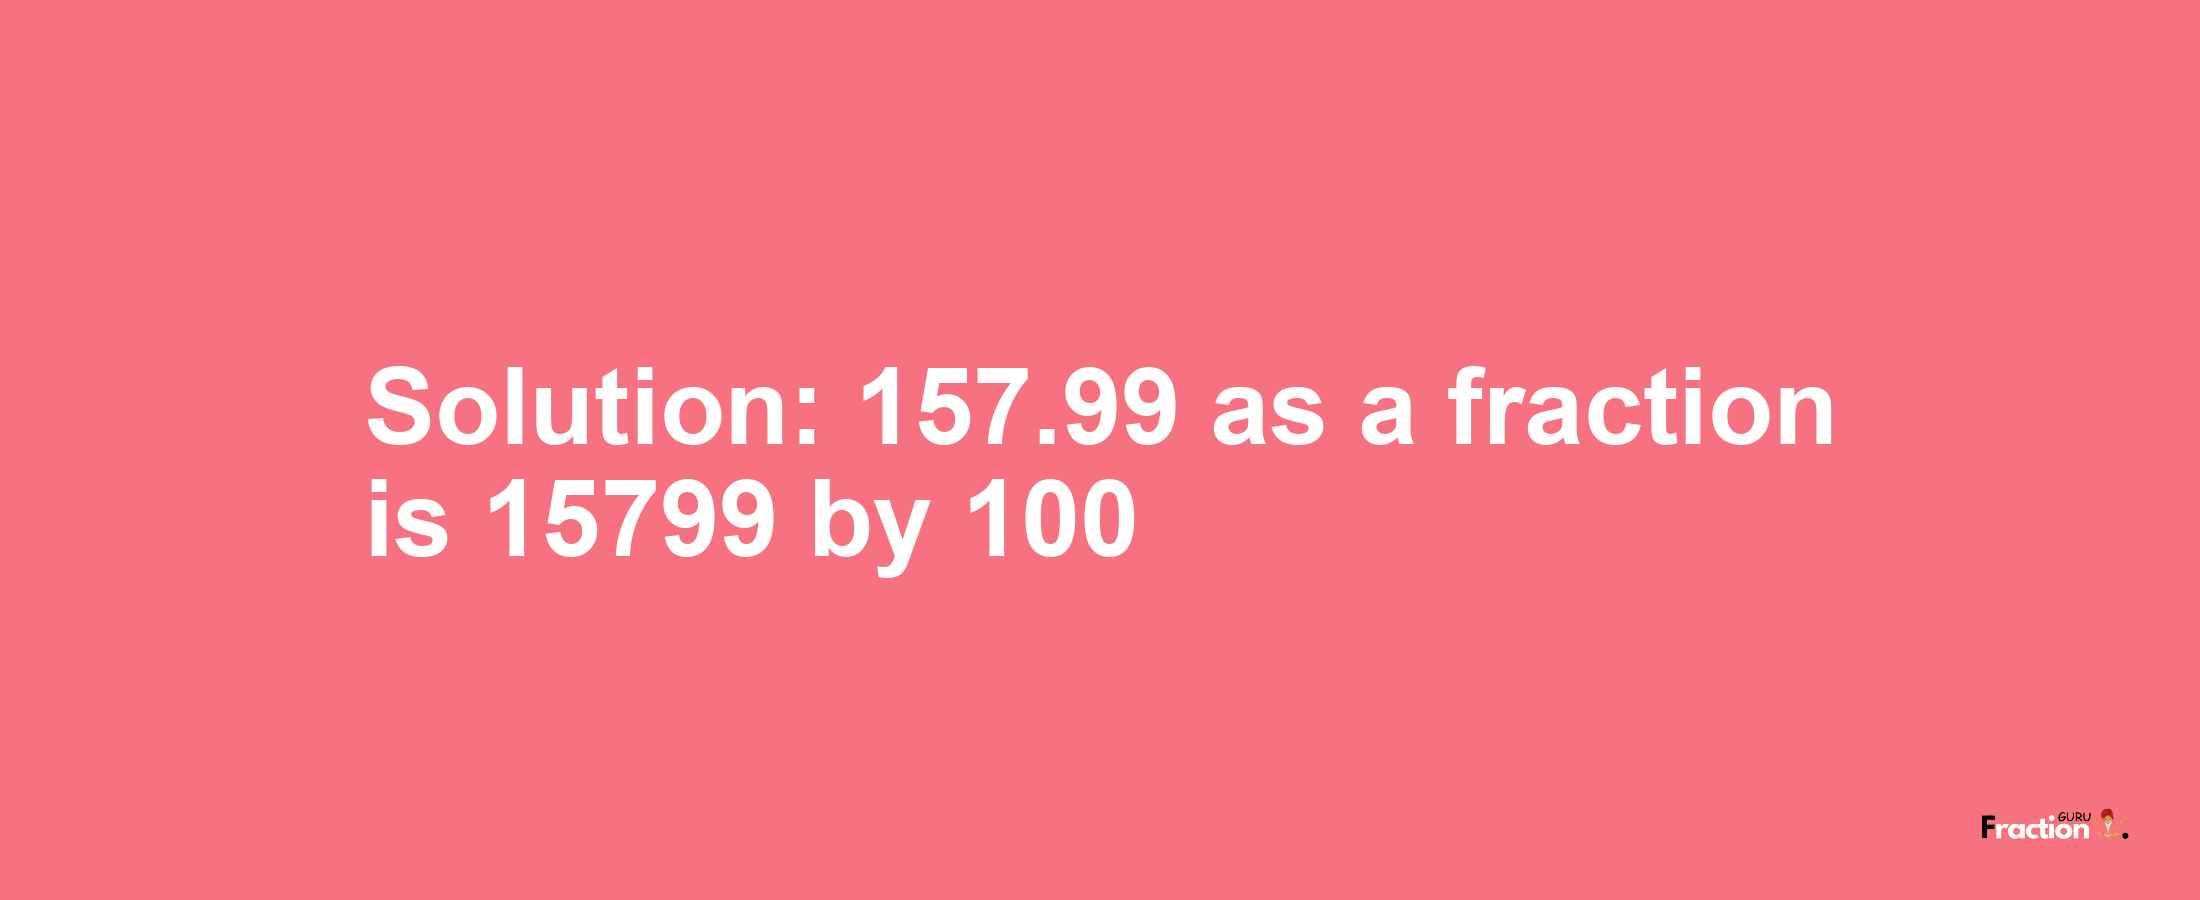 Solution:157.99 as a fraction is 15799/100